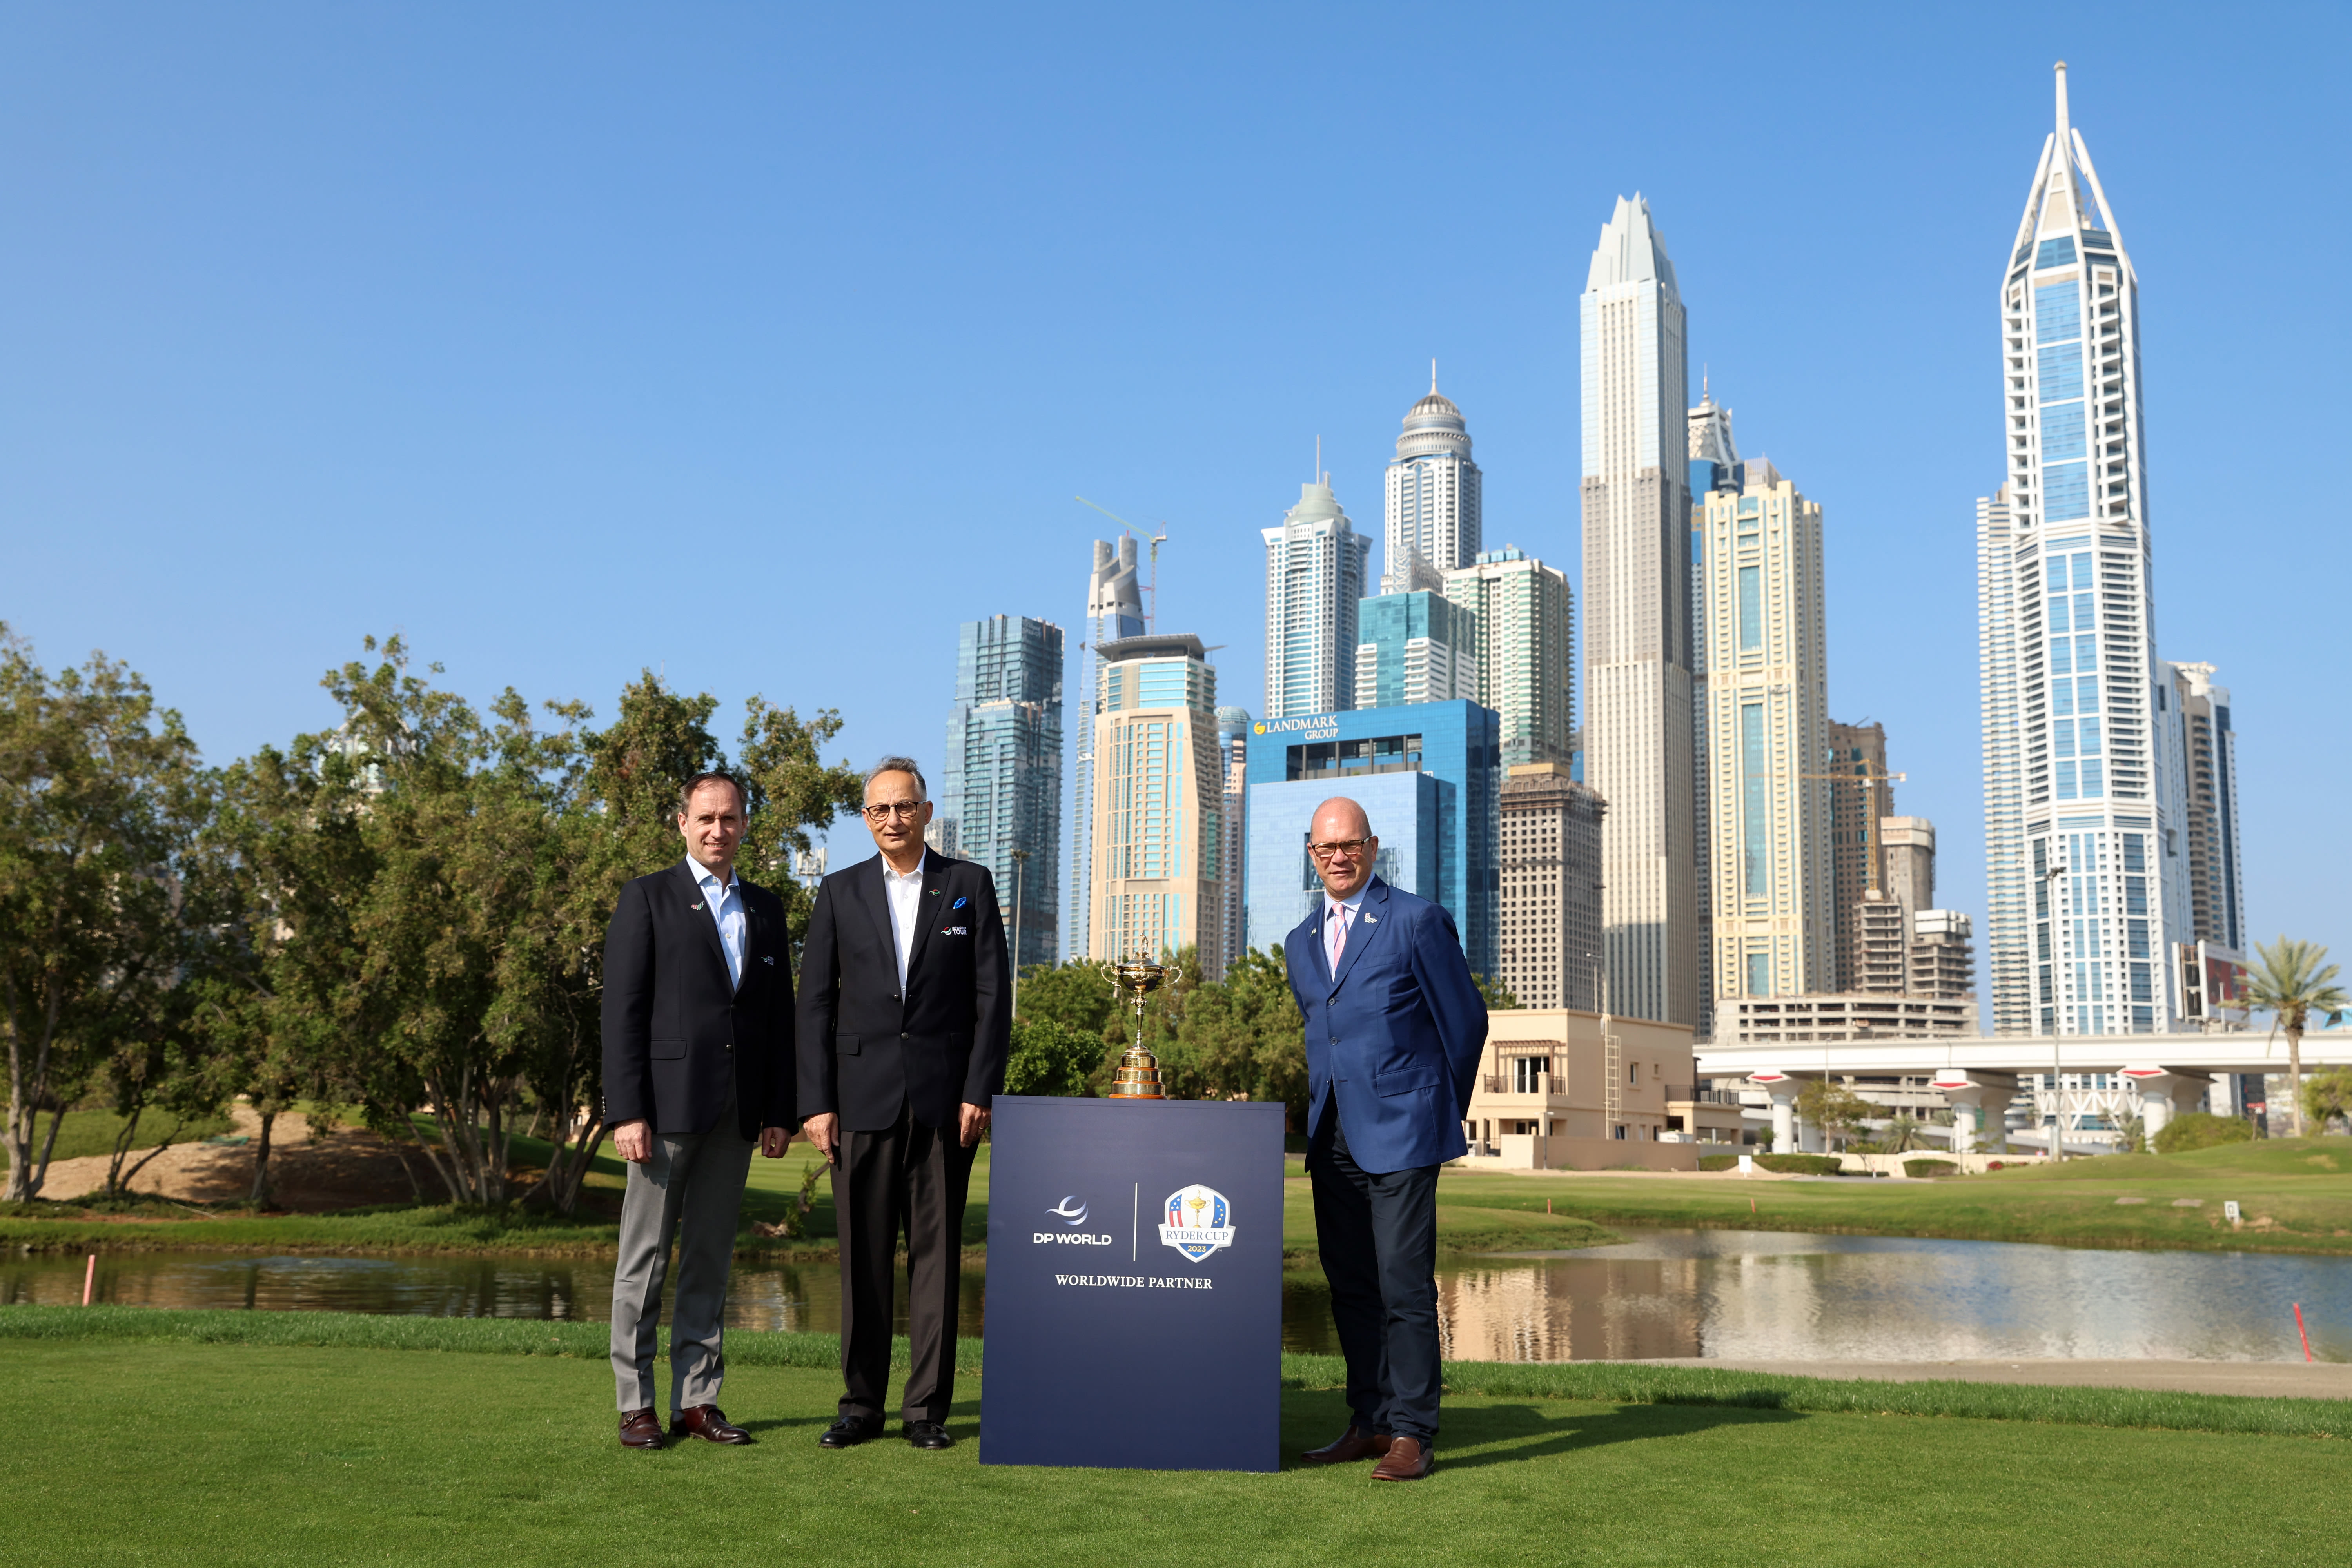 From left to right: Danny van Otterdijk, Group CCO of DP World, Yuvraj Narayan, Group Deputy CEO & CFO of DP World, join Guy Kinnings, Deputy CEO & Ryder Cup Director with the Ryder Cup in Dubai. 